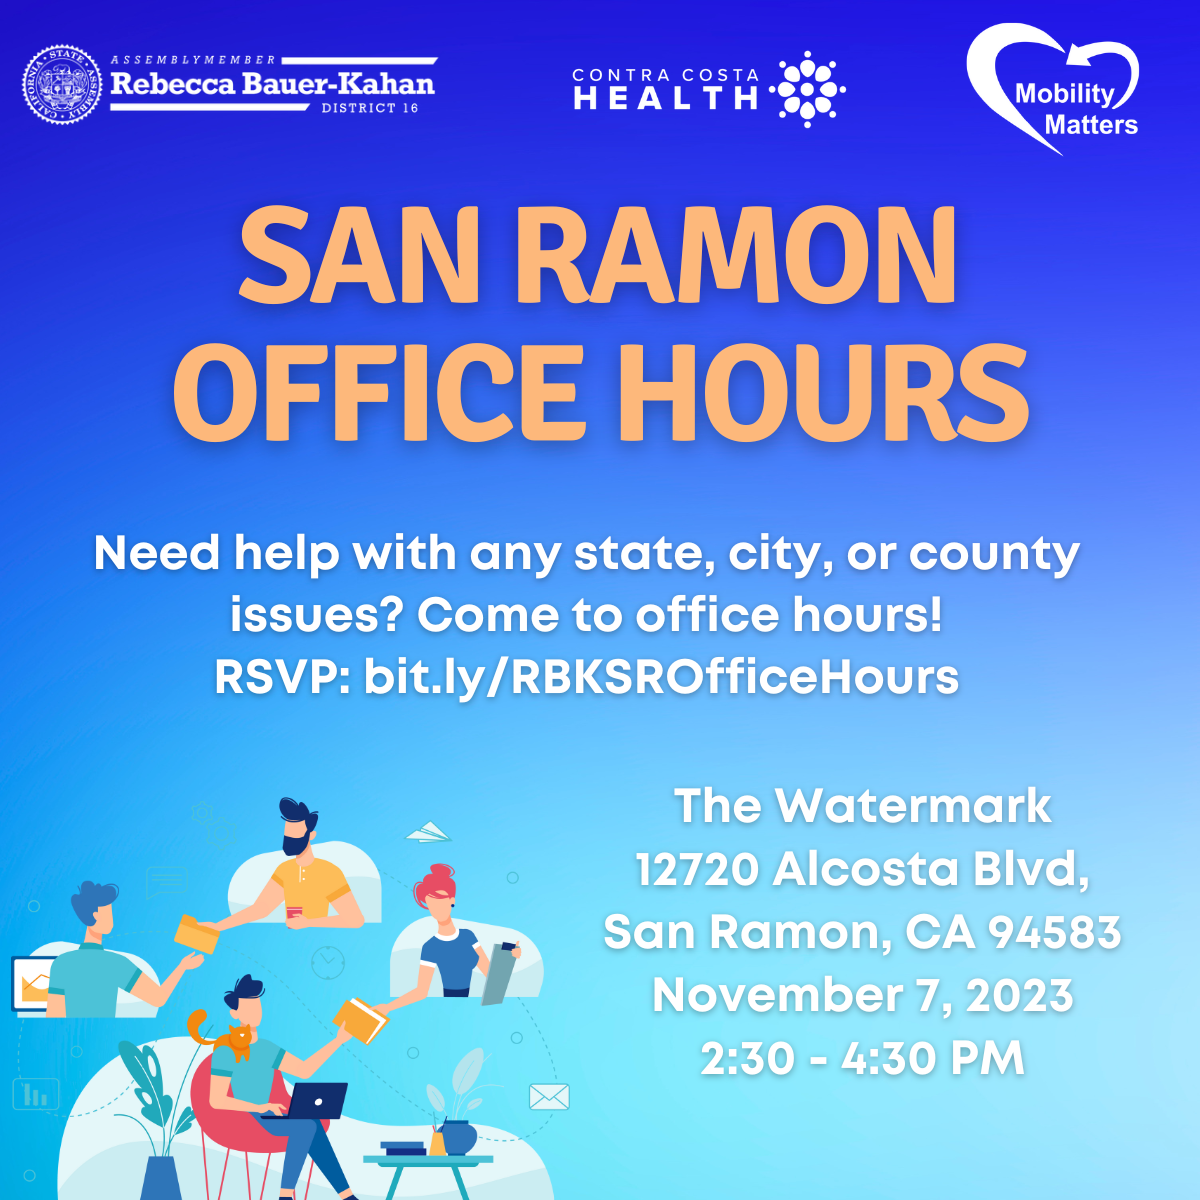 San Ramon Office Hours Flyer Graphic